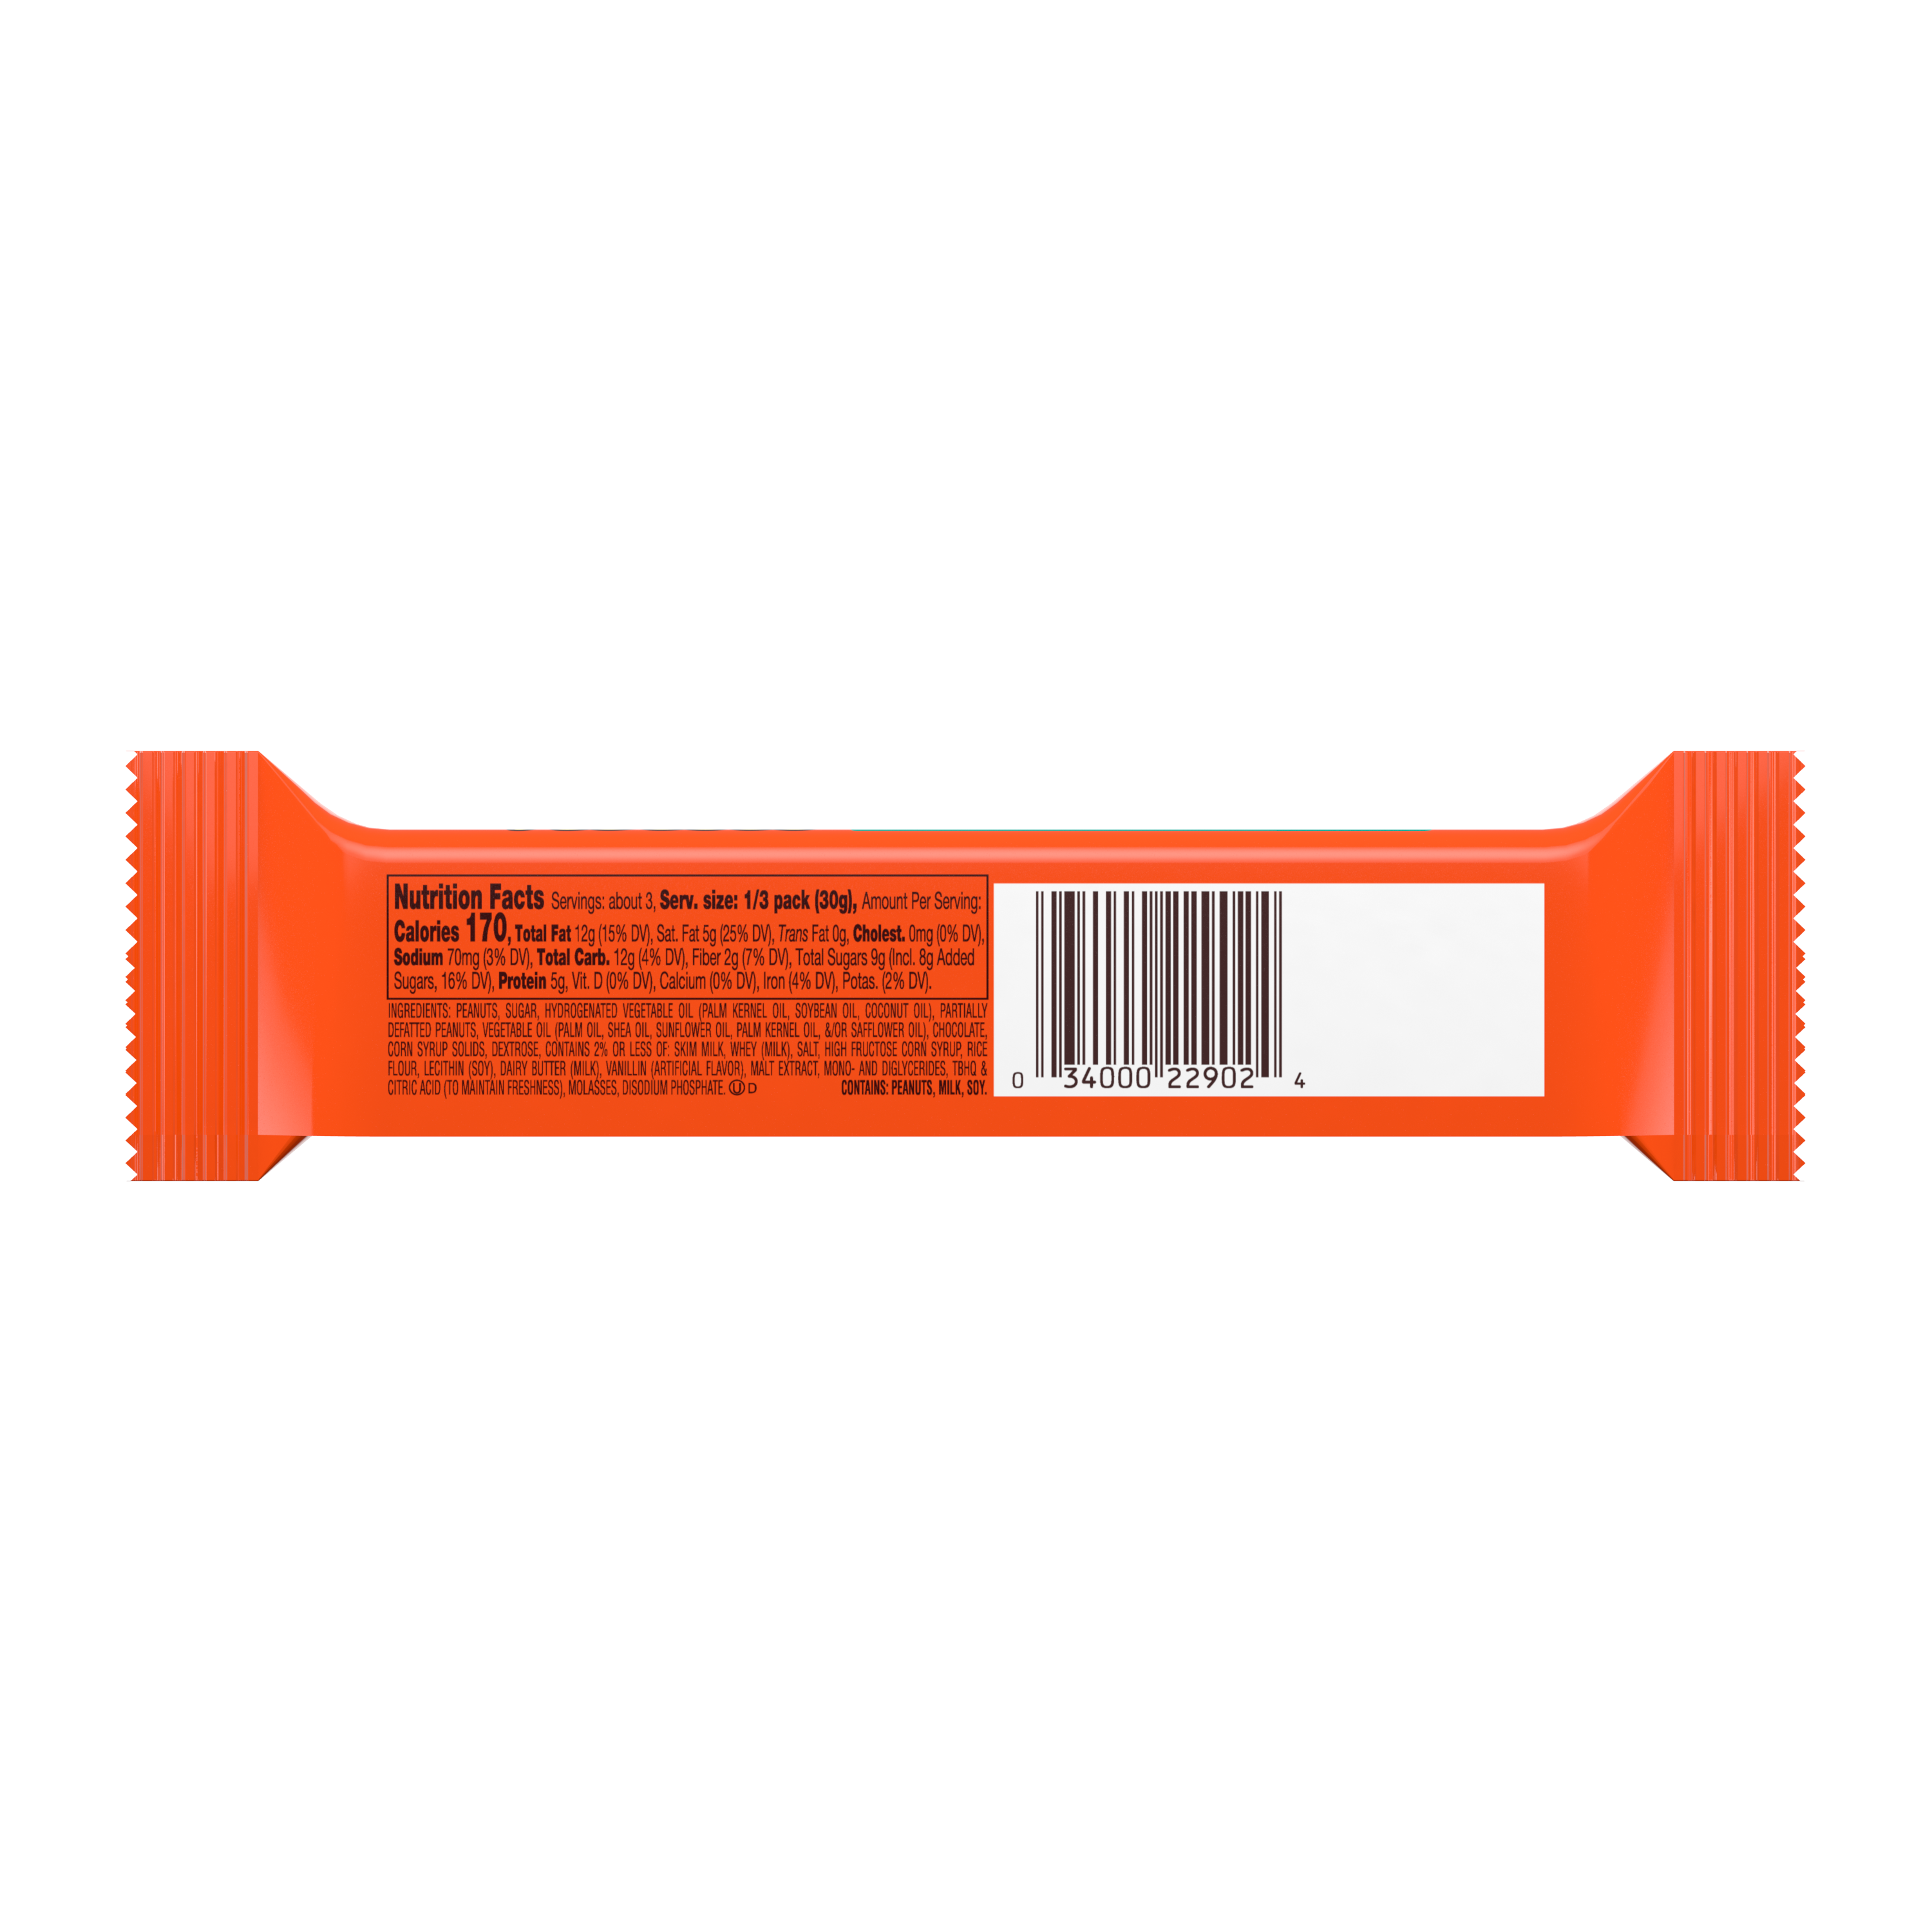 REESE'S Crunchy Peanut King Size Candy Bar, 3.2 oz - Back of Package